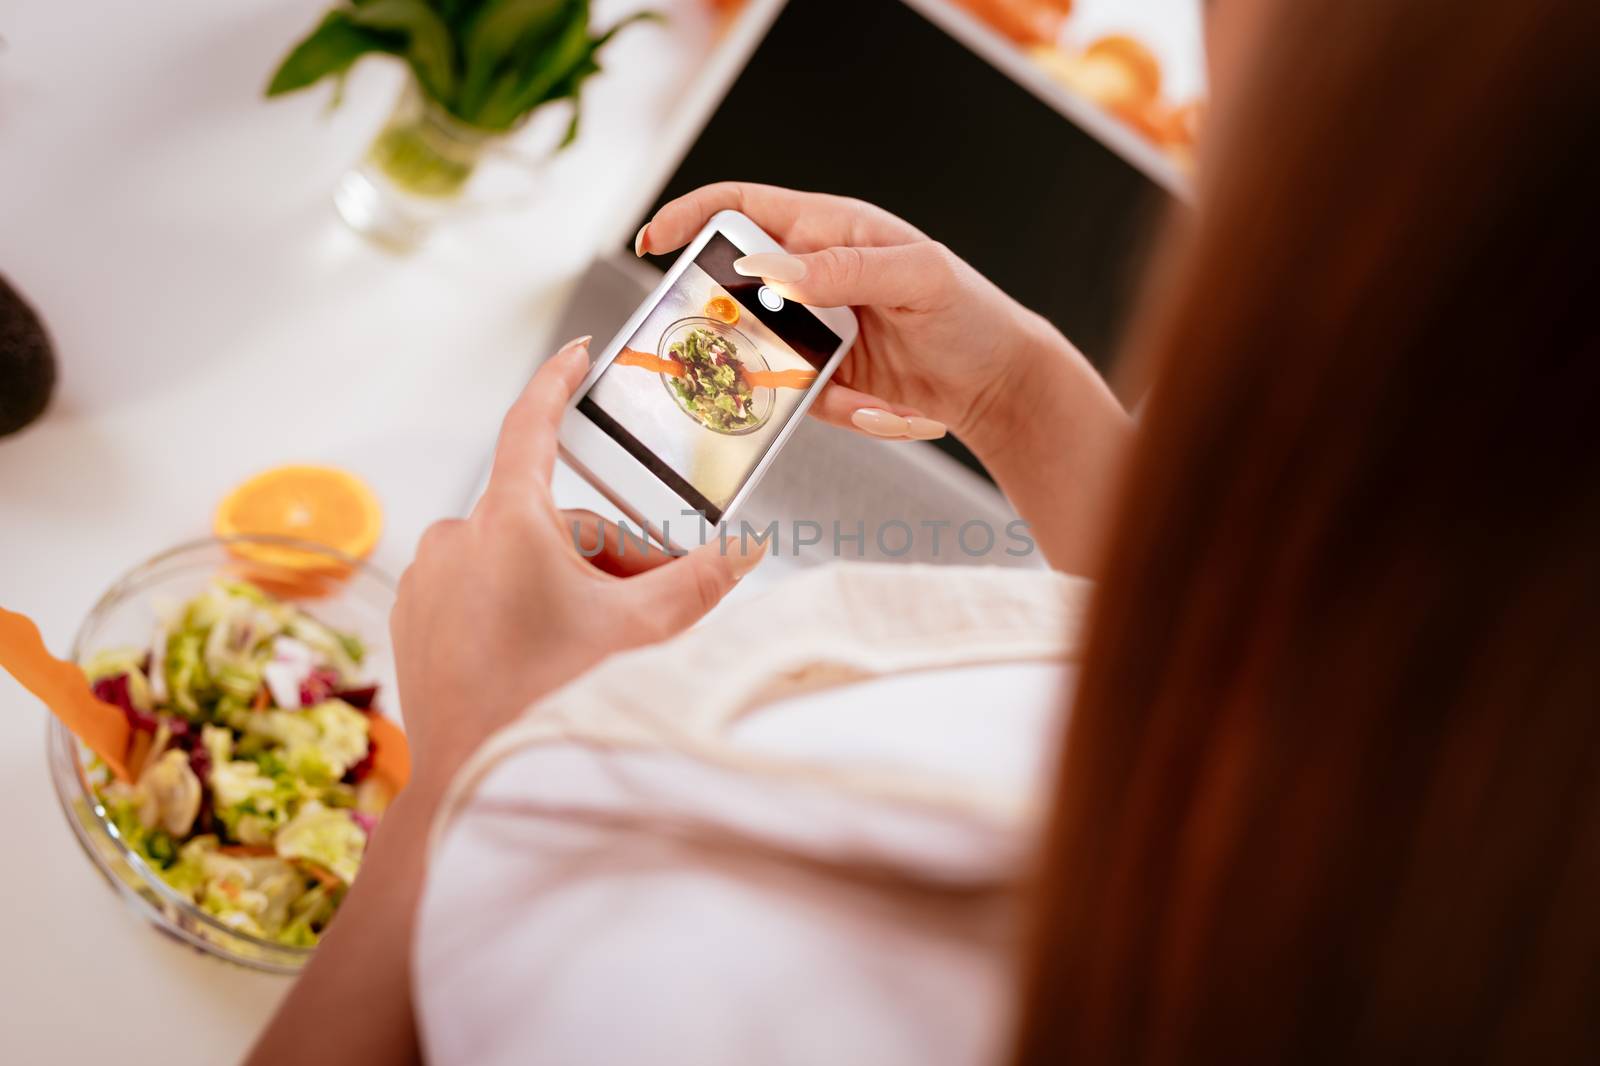 Close-up of a young woman taking photo of healthy salad with smartphone for her blog. Rear view. Selective focus.